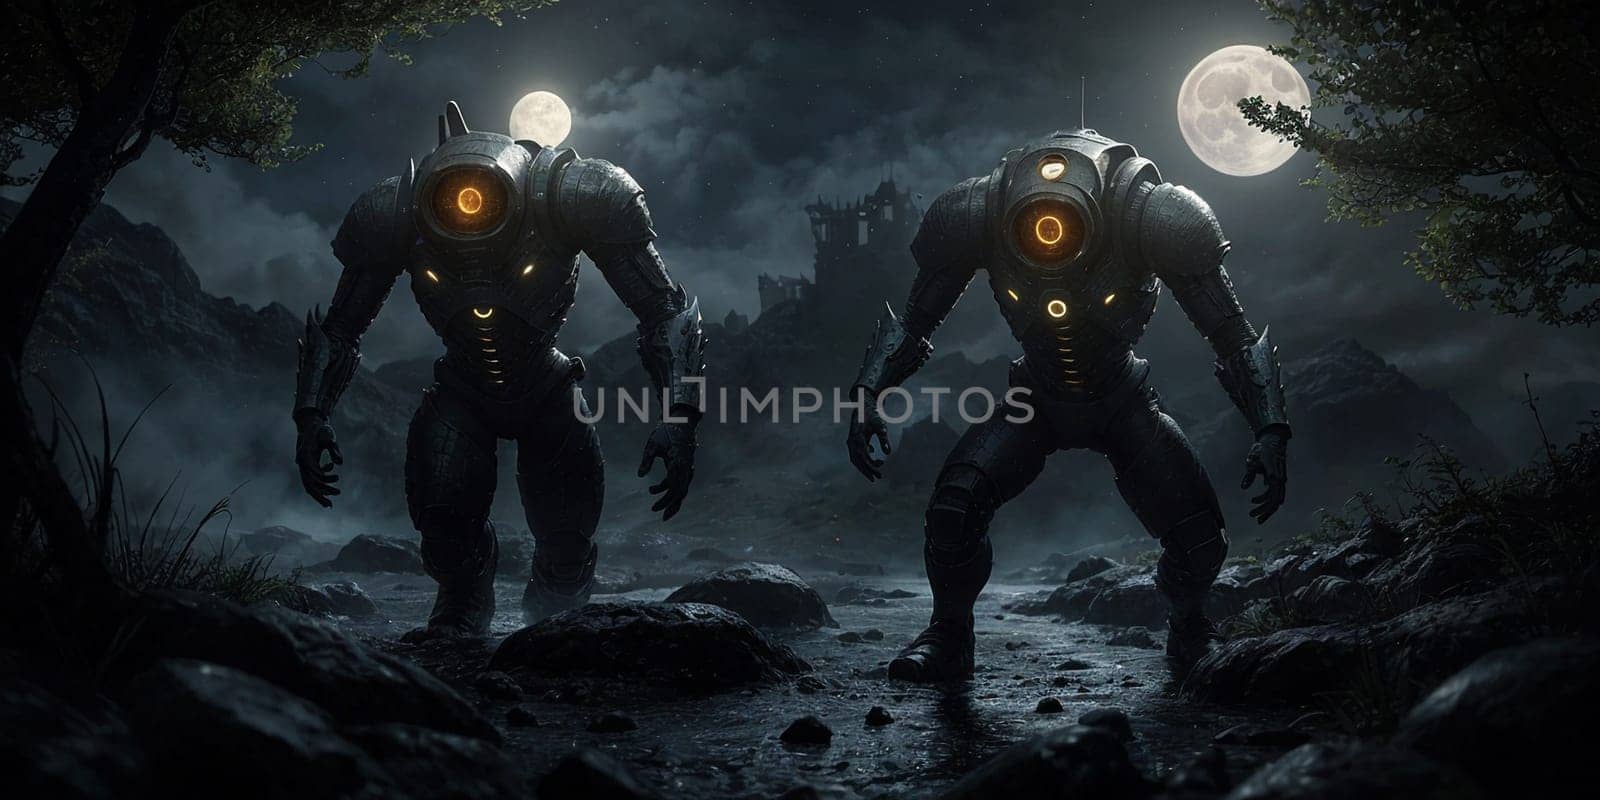 Mysterious creatures in spacesuits. High quality illustration